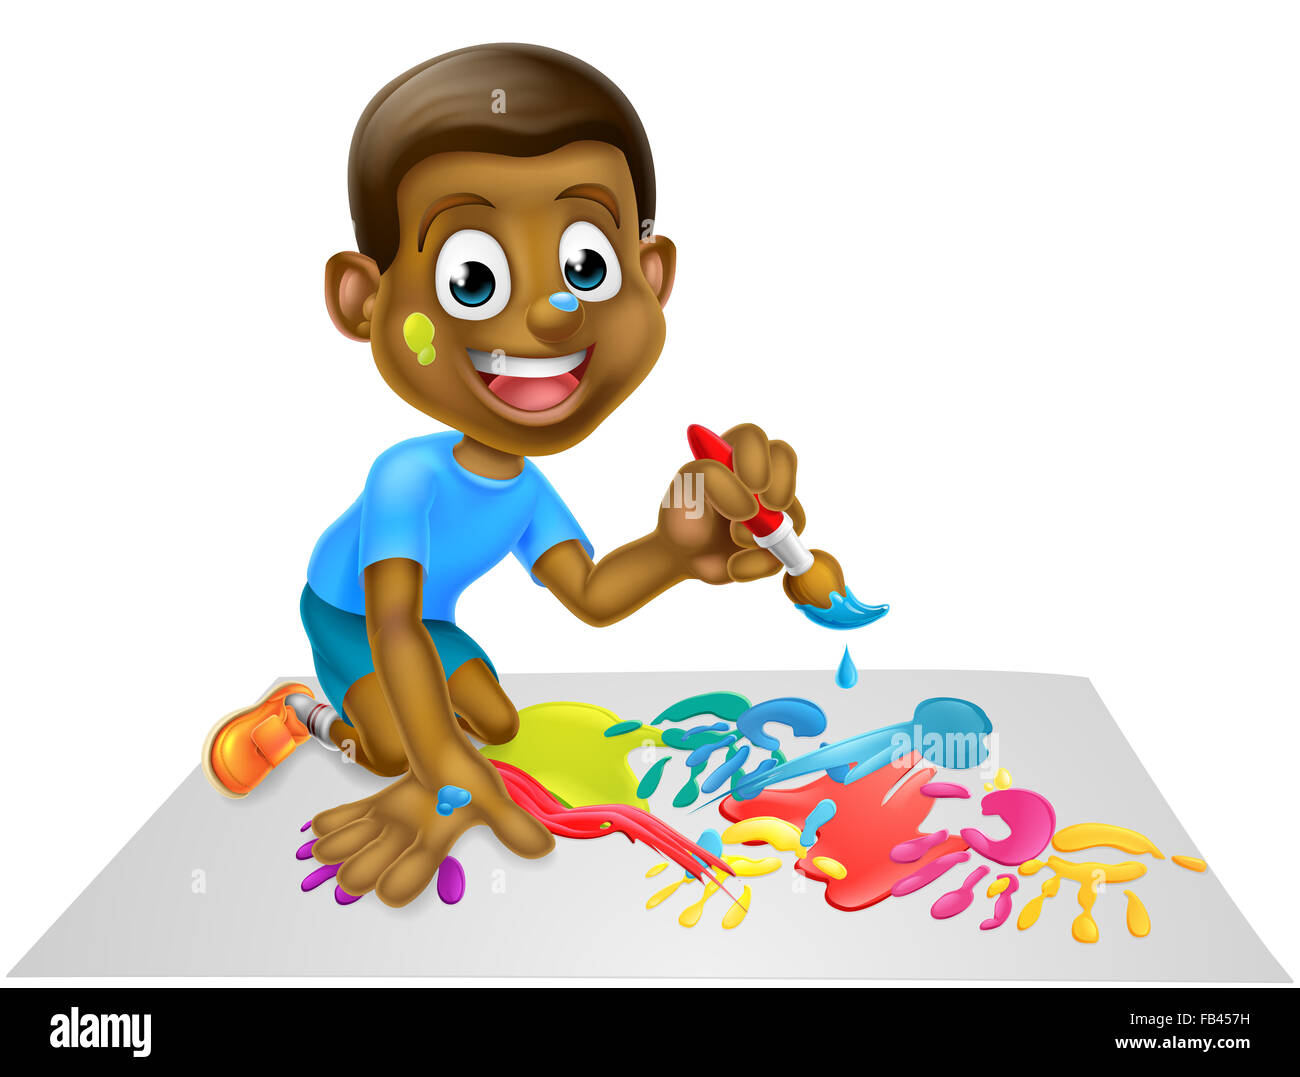 Cartoon boy child messy playing with paint painting with his paintbrush Stock Photo